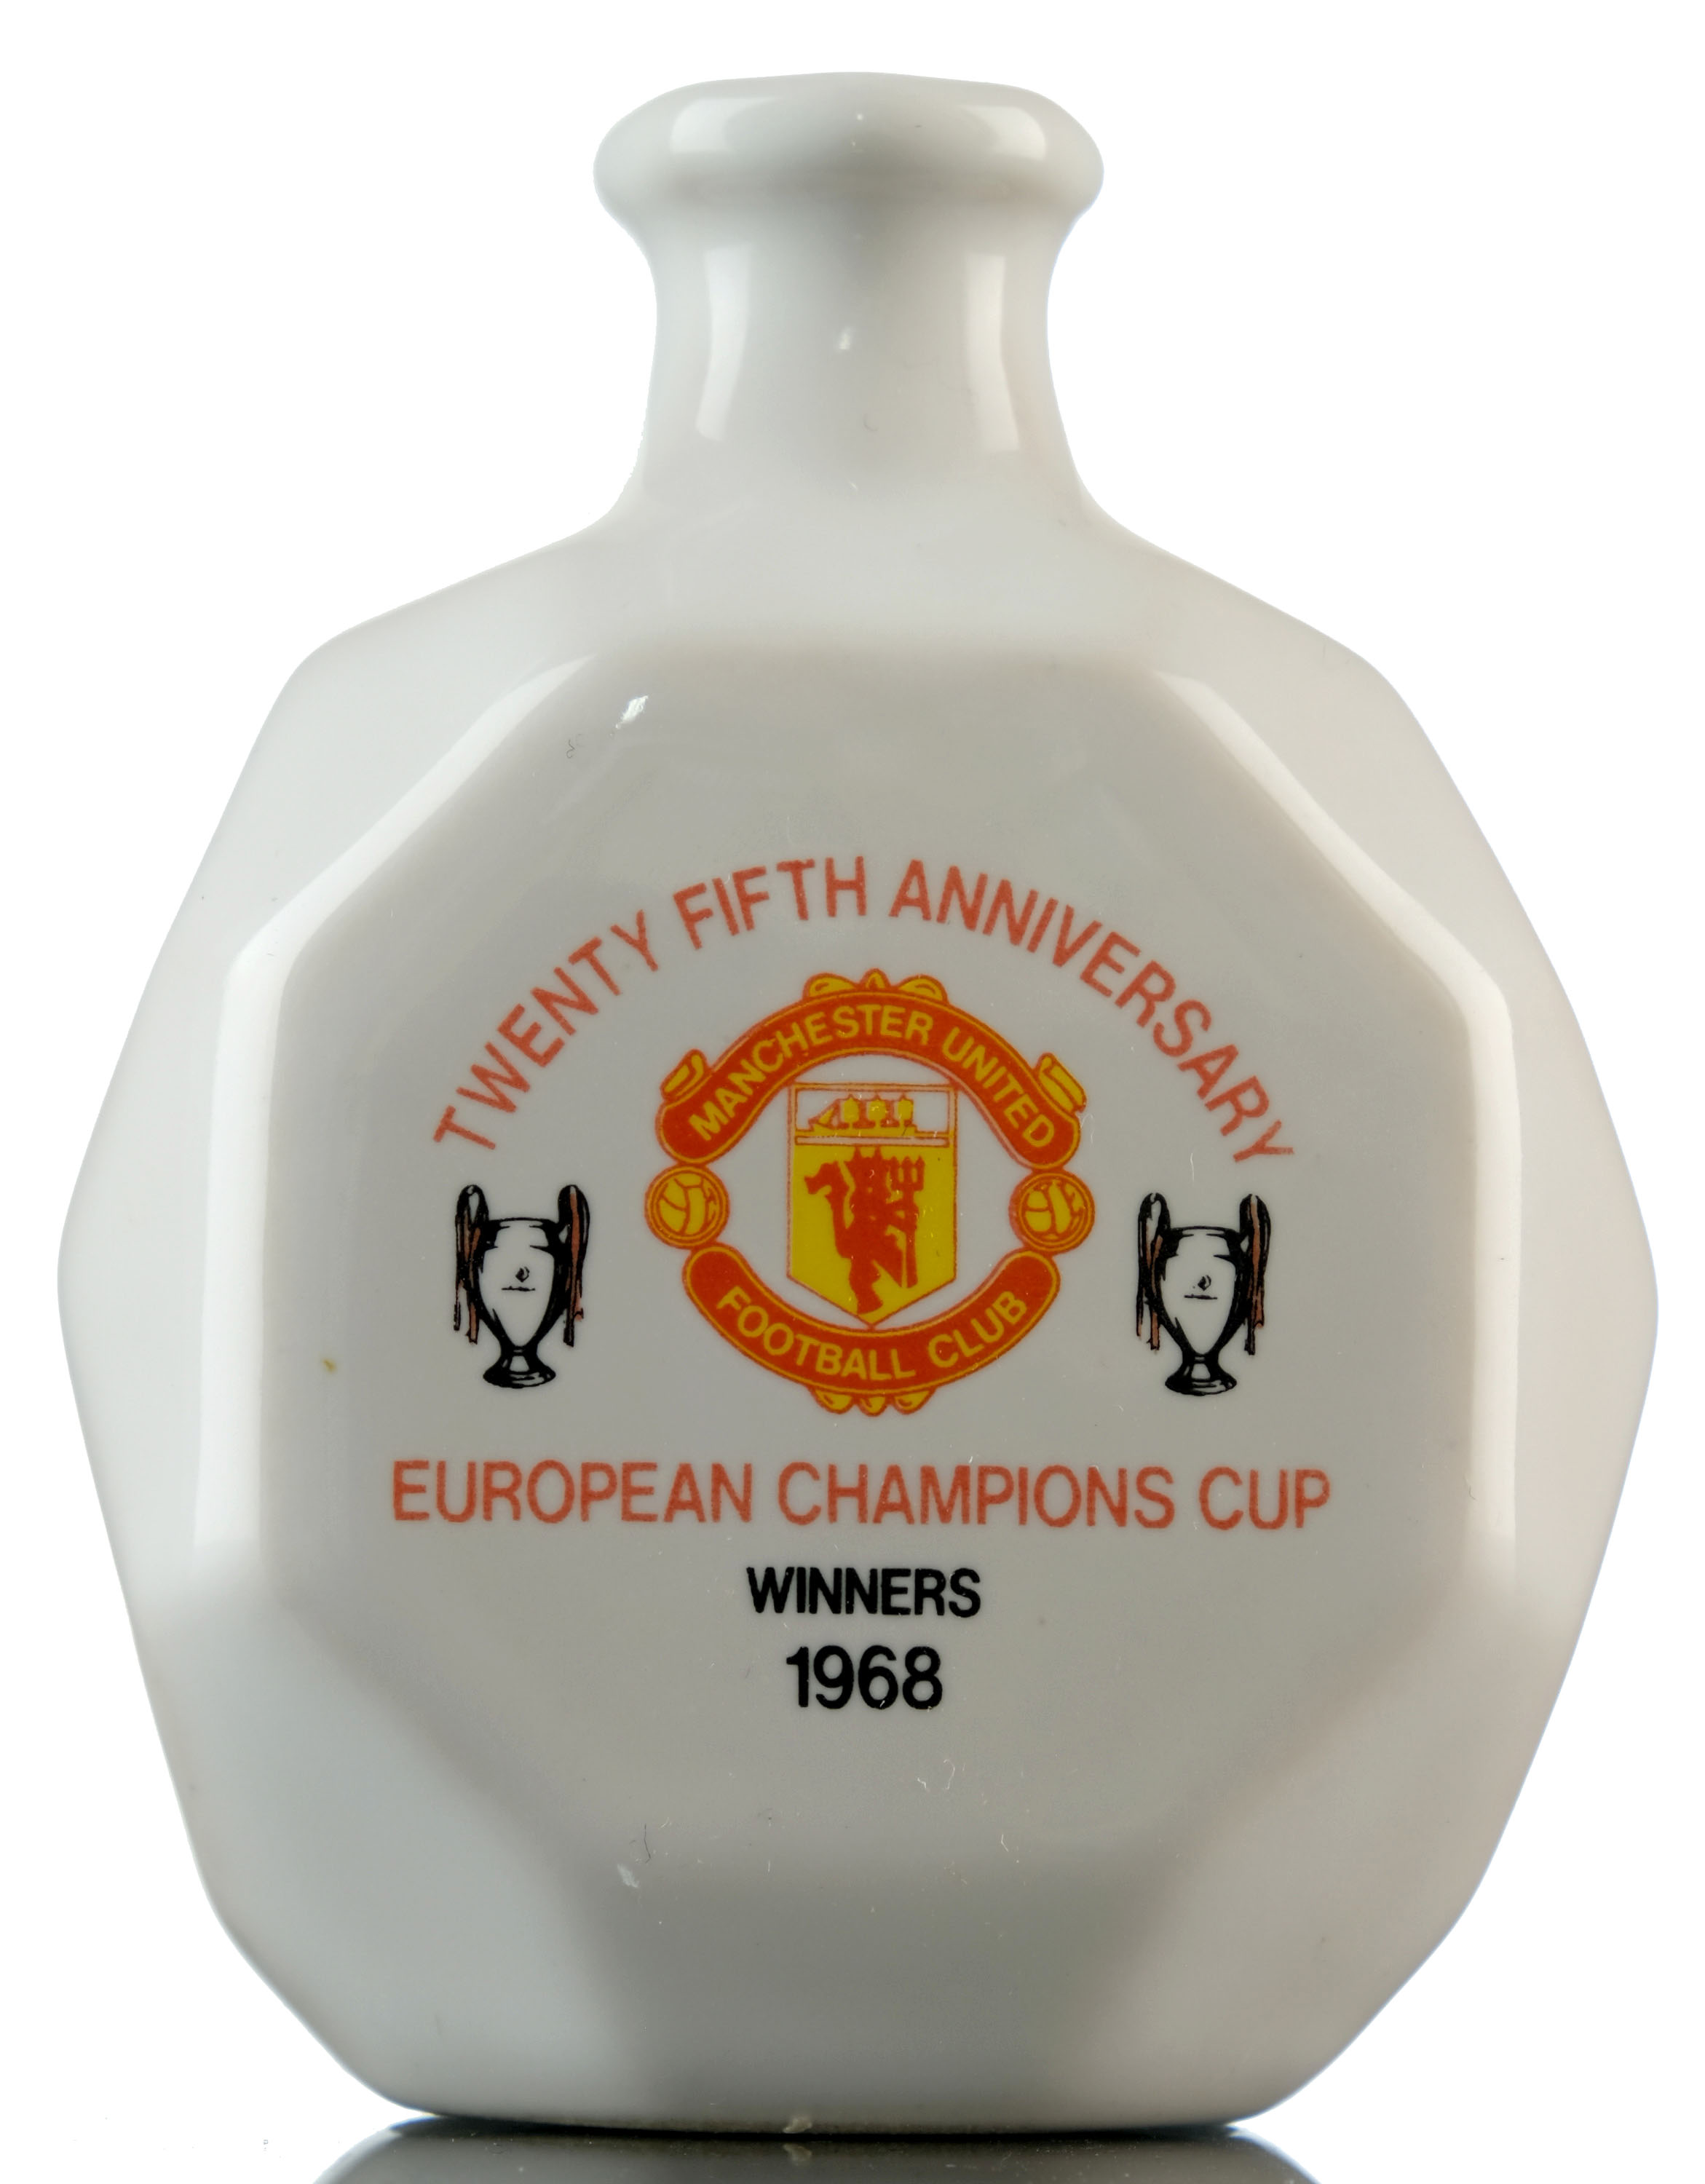 Bobby Charlton Manchester United European Champions Cup Winners 1968 Miniature